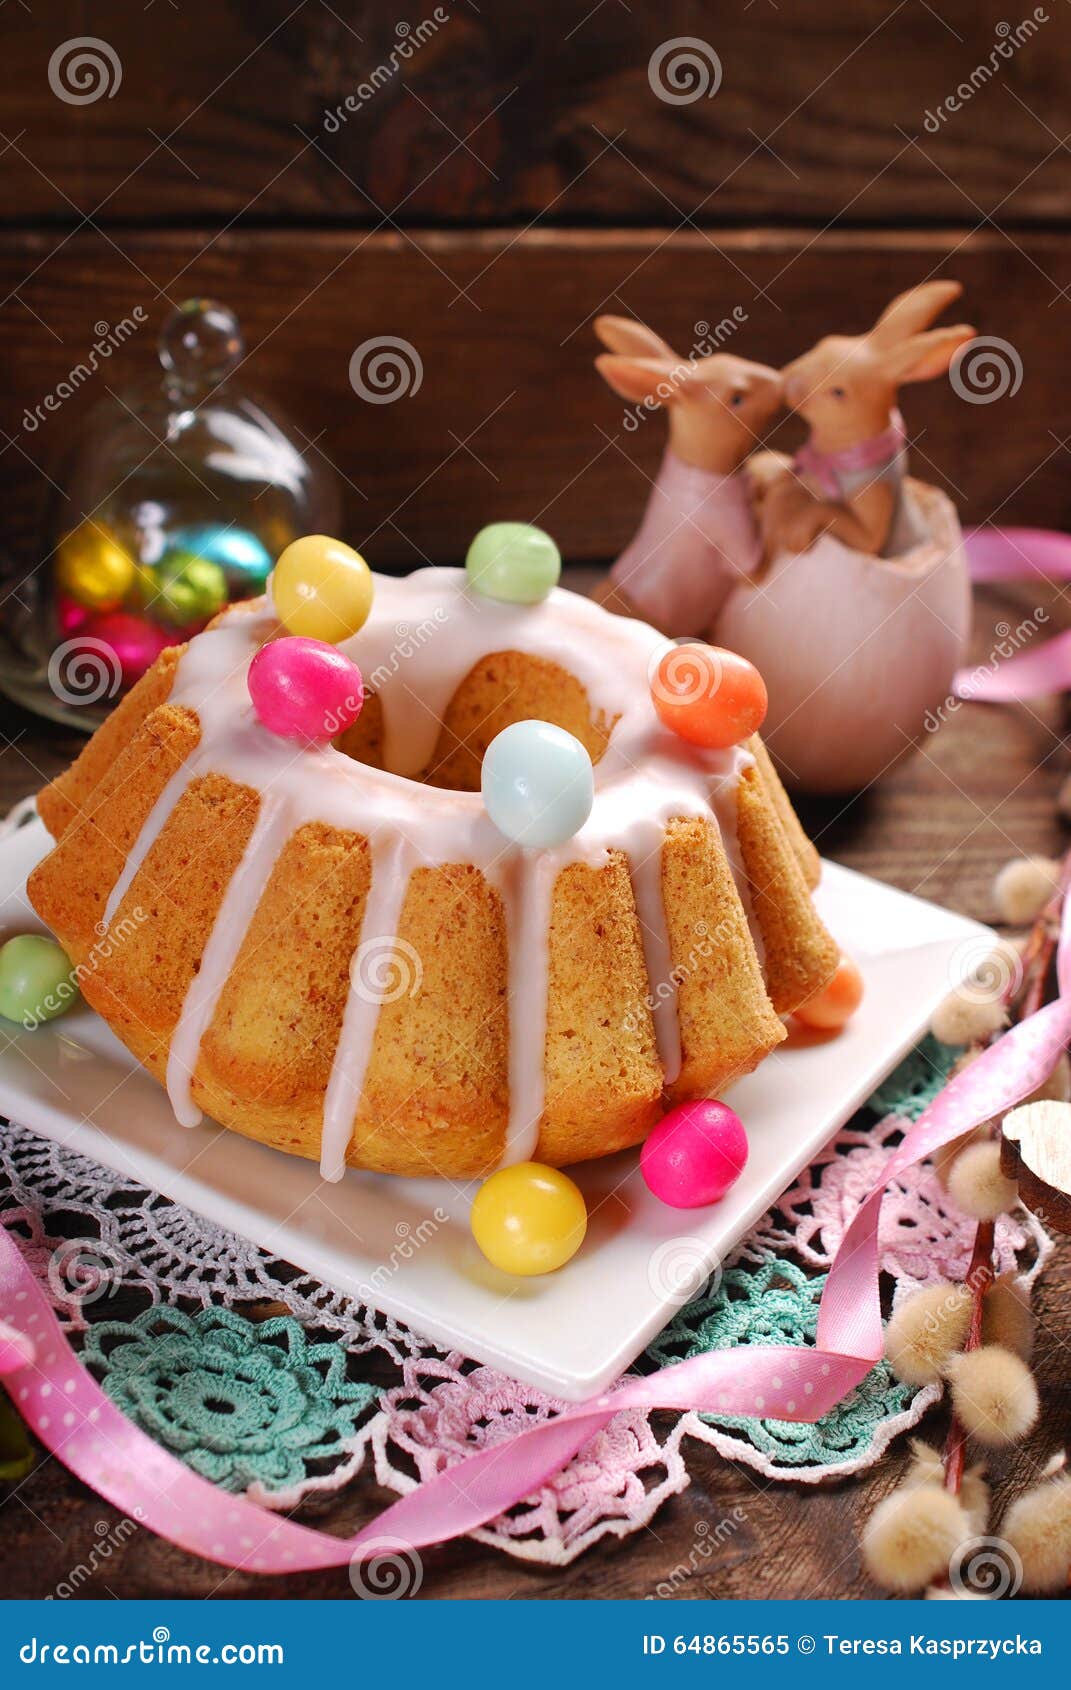 Easter Almond Ring Cake on Wooden Table Stock Image - Image of almond ...